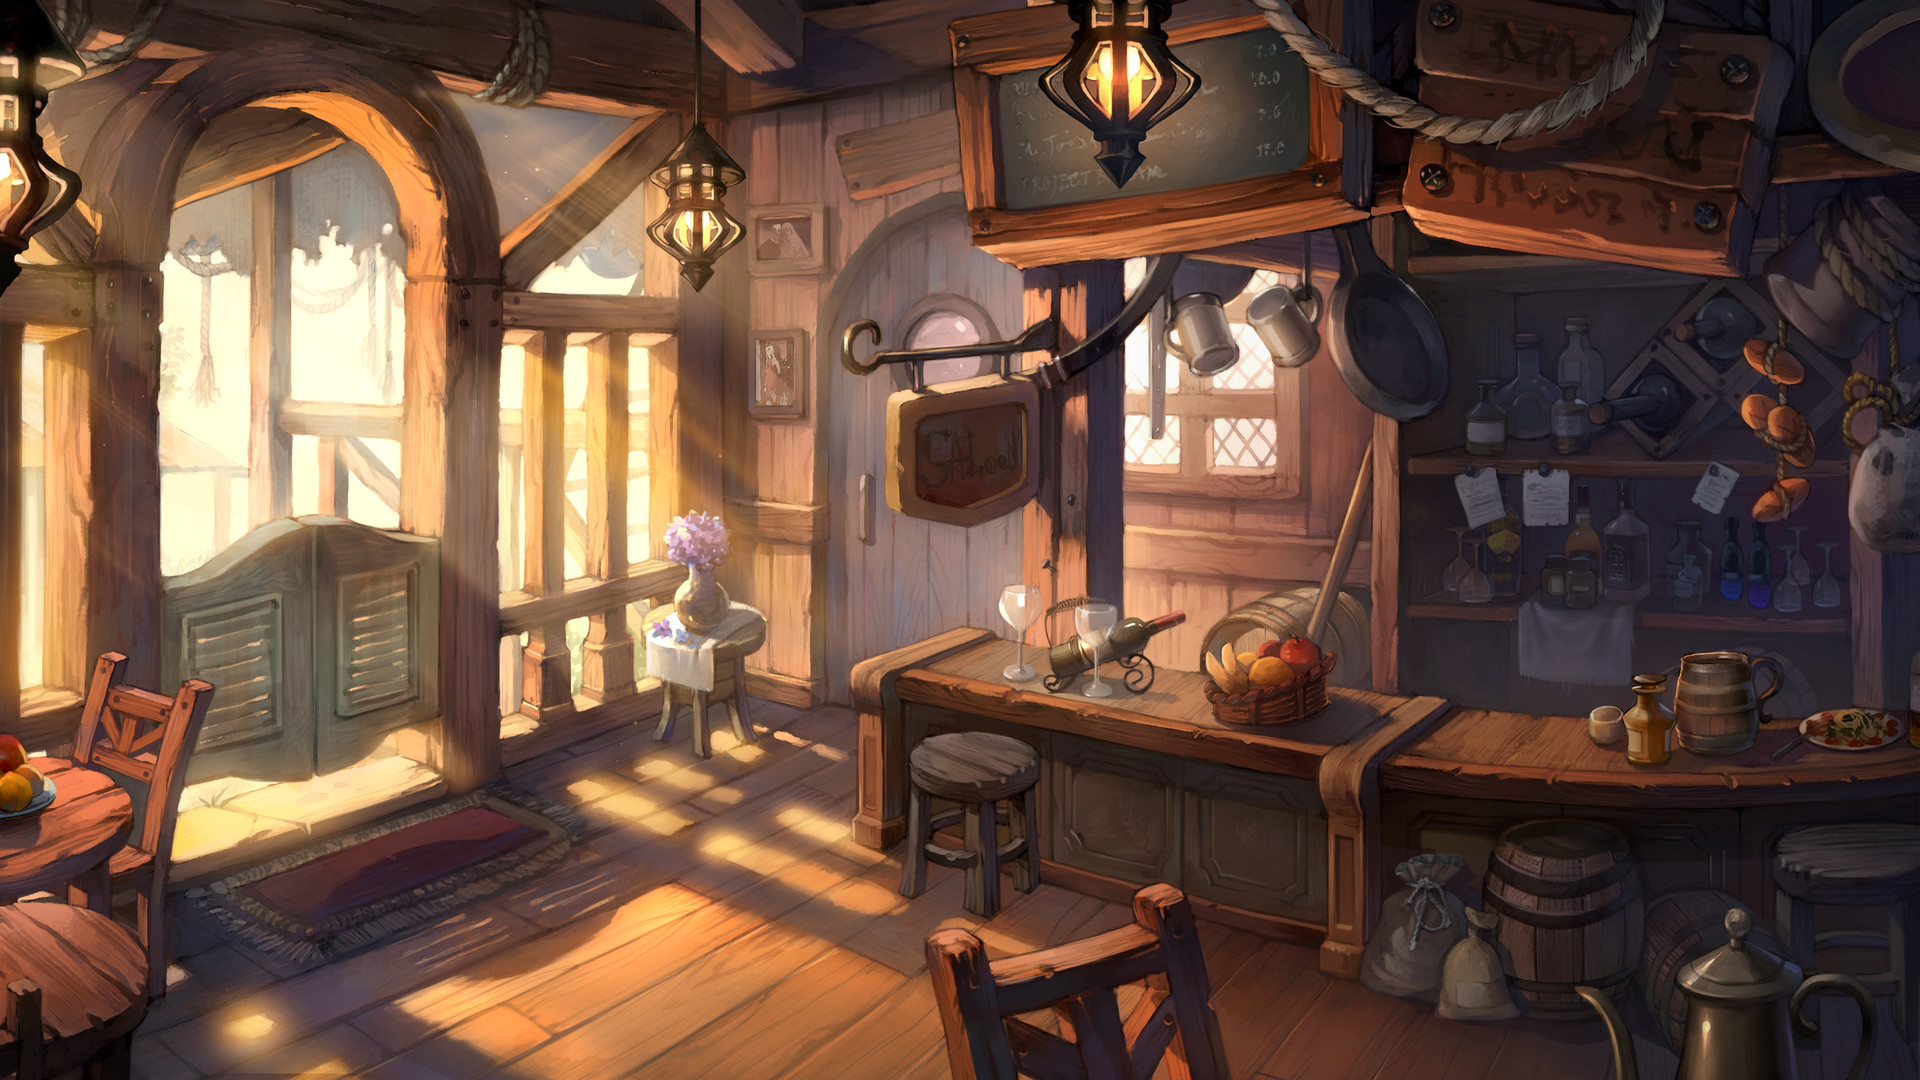 General 1920x1080 tavern wood sunlight drawing chair wooden surface baskets glass bar sun rays fruit food vases flowers cutlery